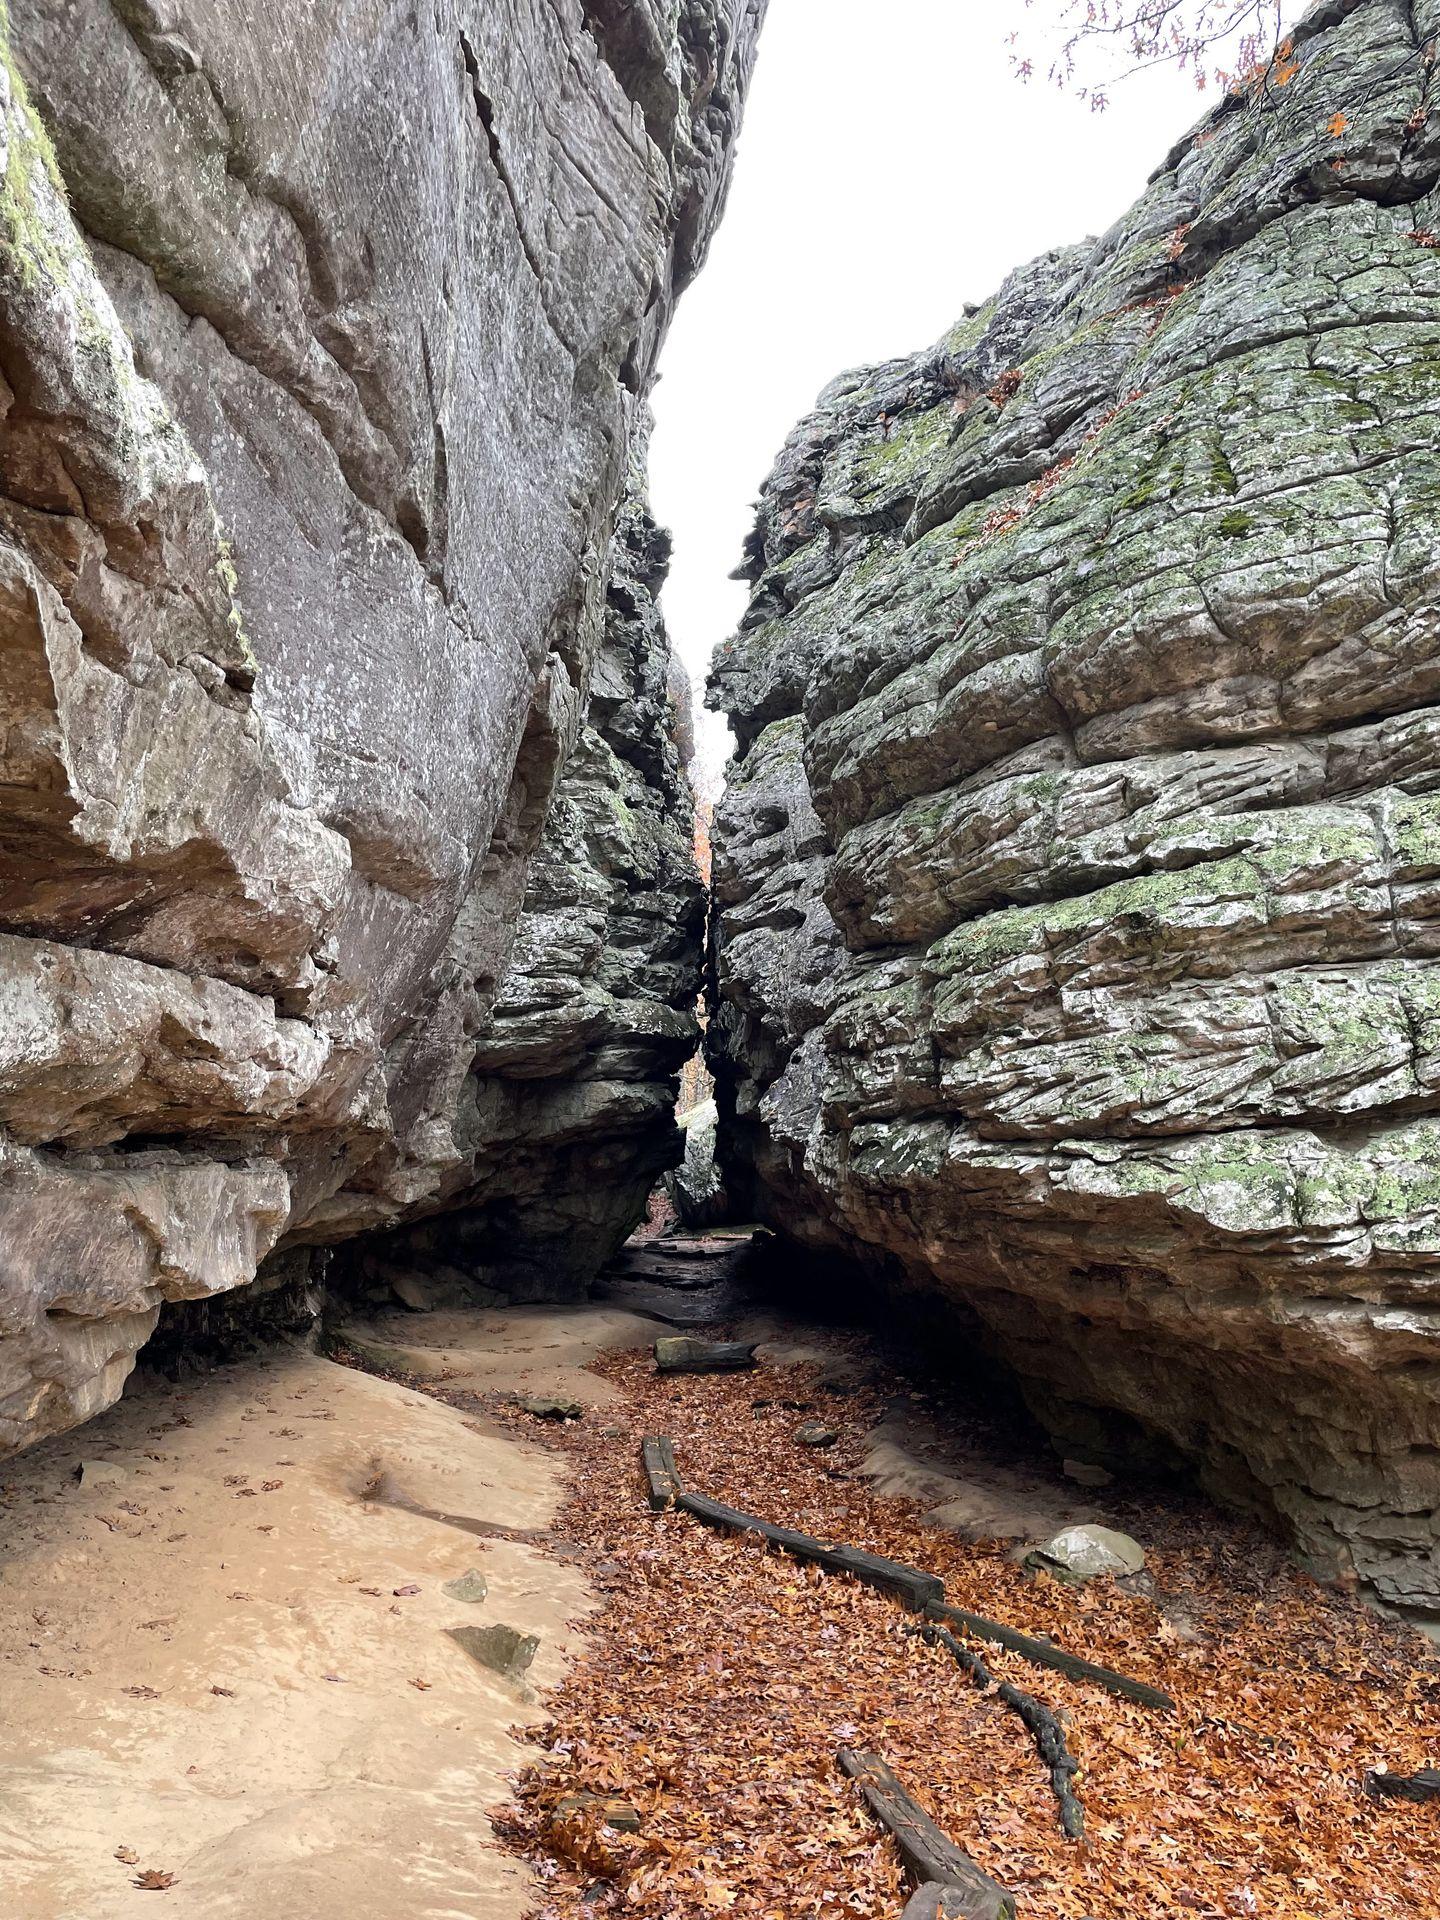 Some large rock faces next to each other with a small path between them. Red leaves cover the ground.